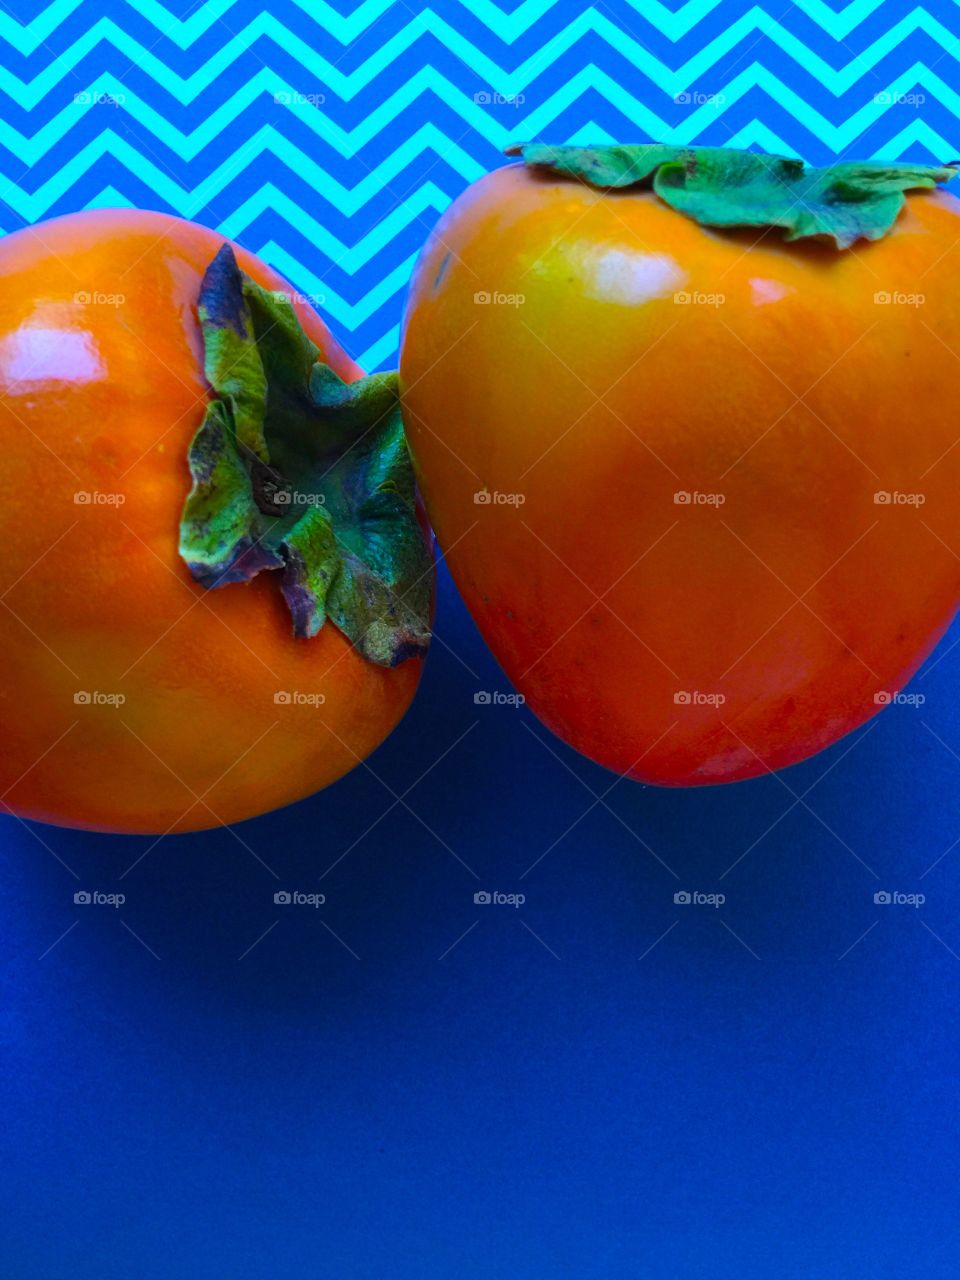 Persimmons on chevron background with copy space